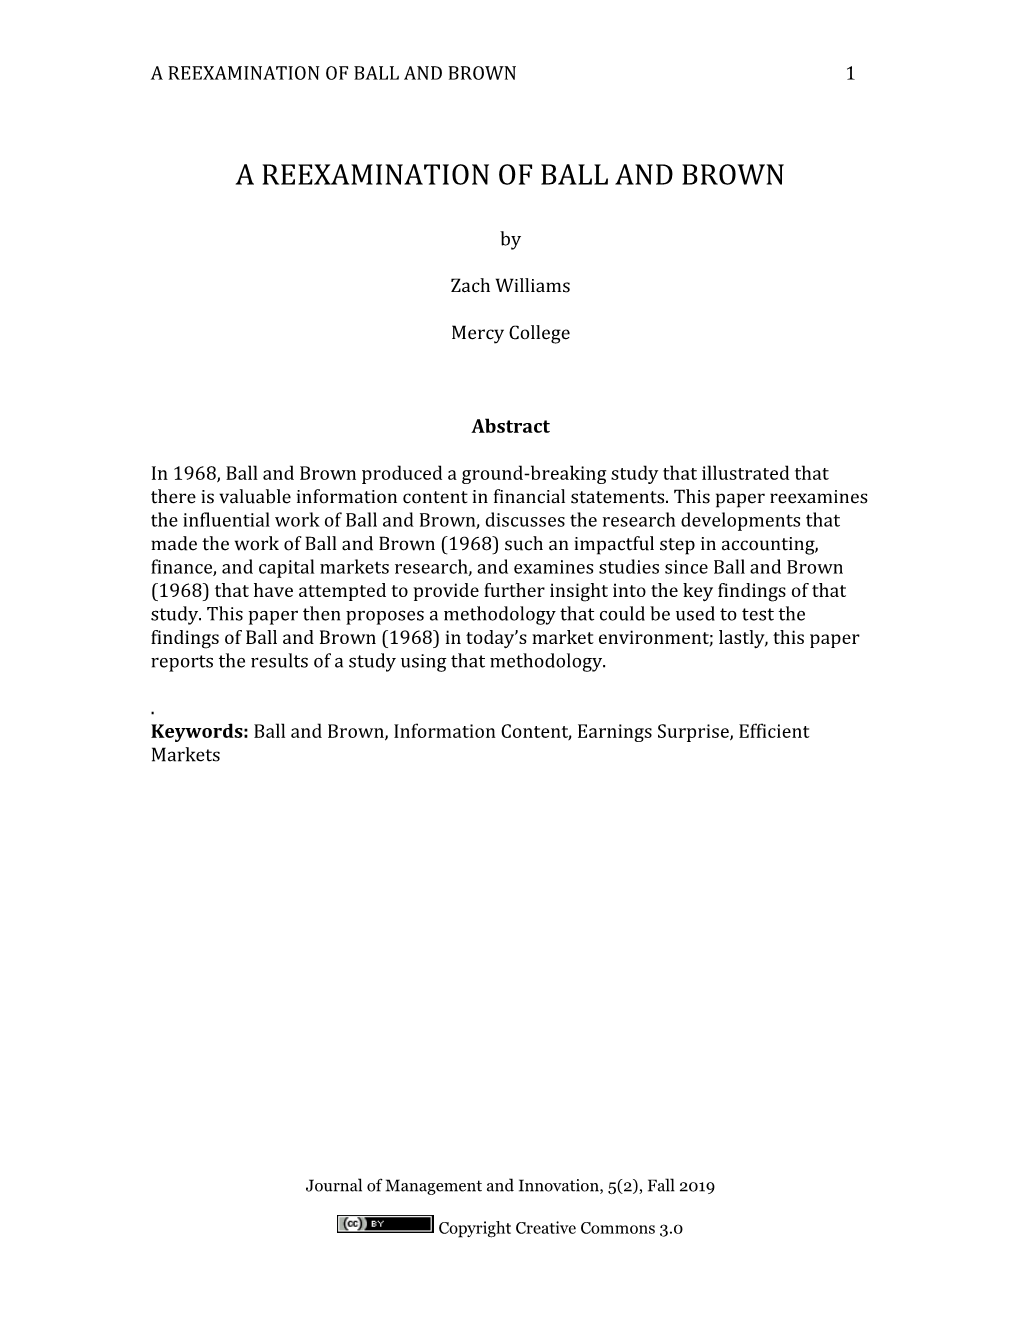 A Reexamination of Ball and Brown 1